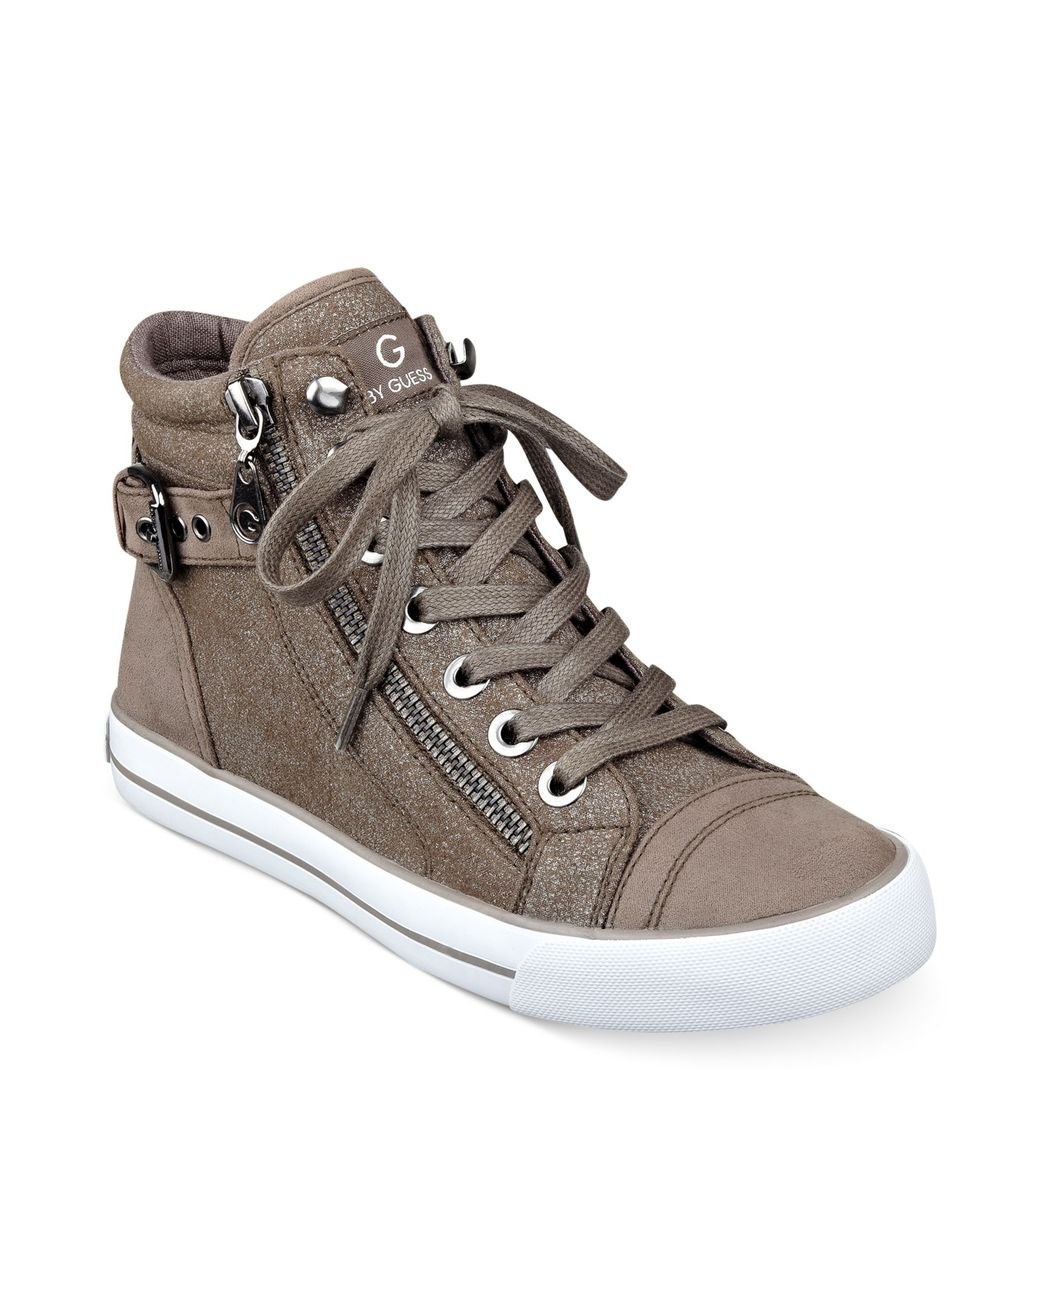 G by Guess Womens Olama High Top Sneakers in Gray | Lyst